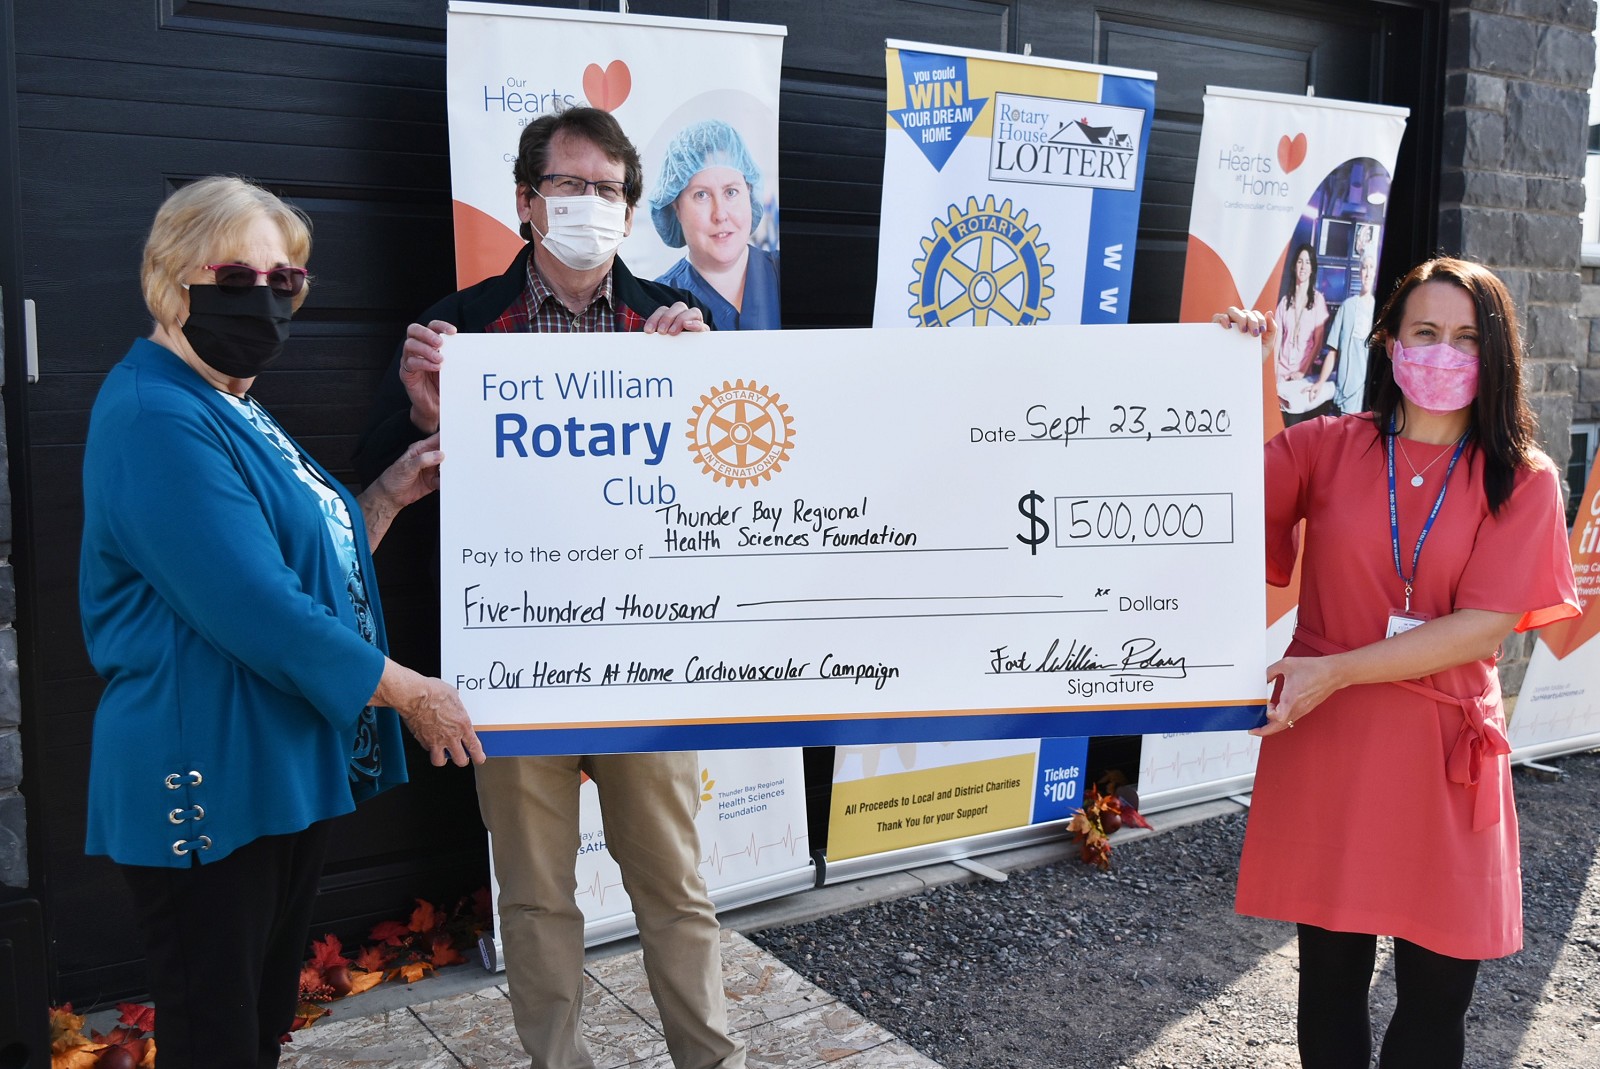 Fort William Rotary Club Announces $500,000 Donation to the Our Hearts At Home Campaign